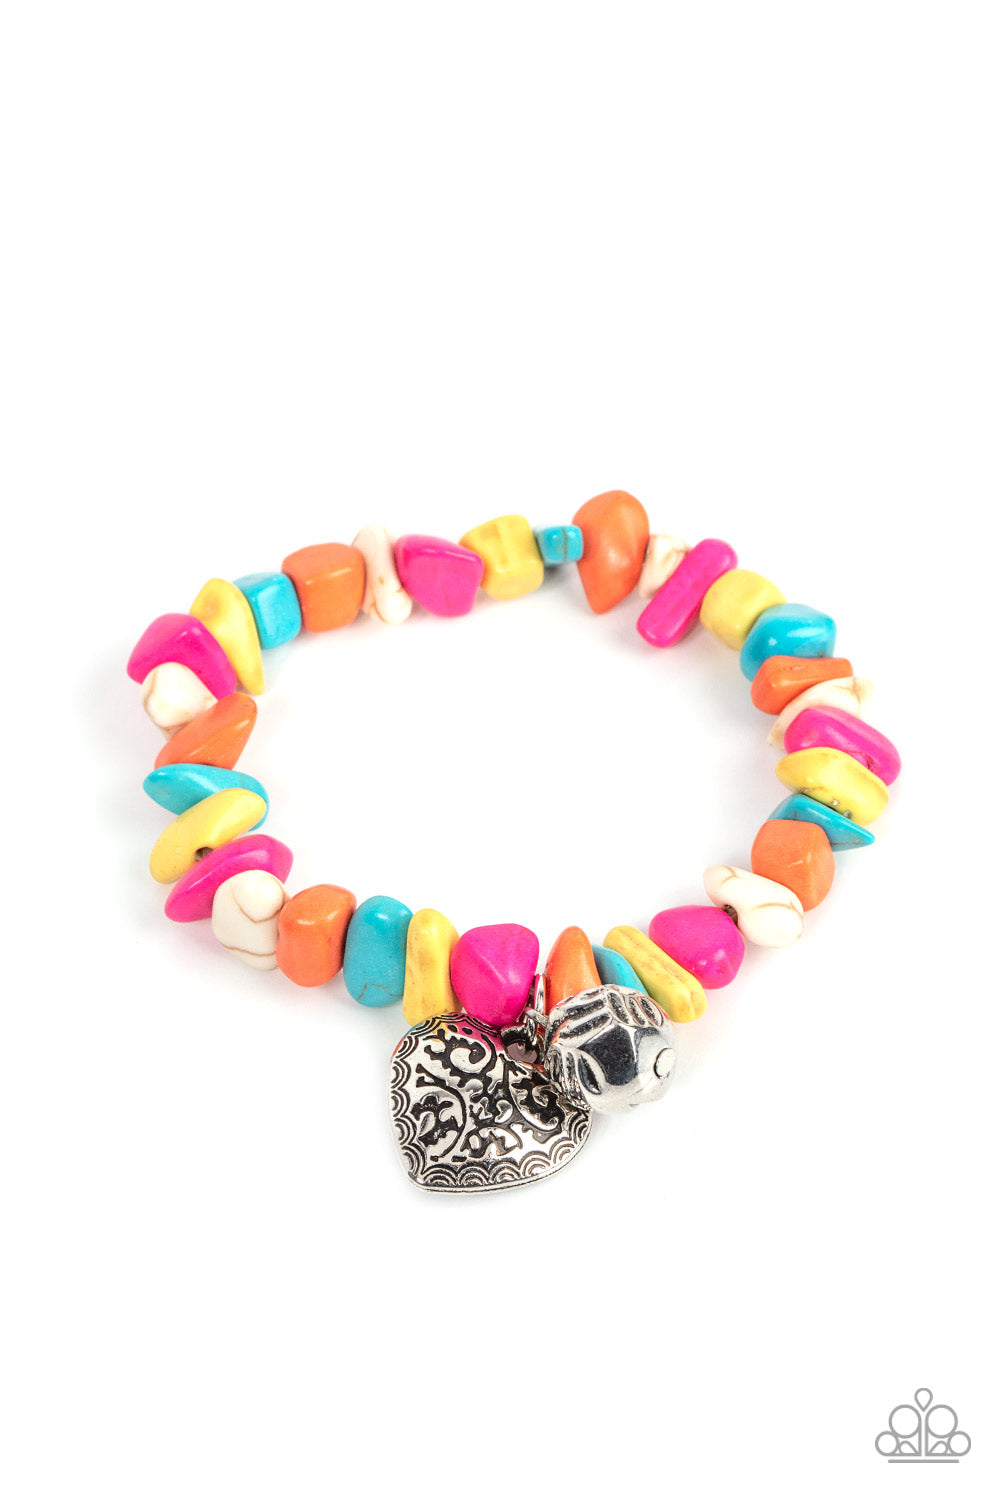 Infused with a hammered silver bead and a decorative silver heart charm, an earthy collection of multicolored pebbles are threaded along a stretchy band around the wrist for a whimsical fashion.